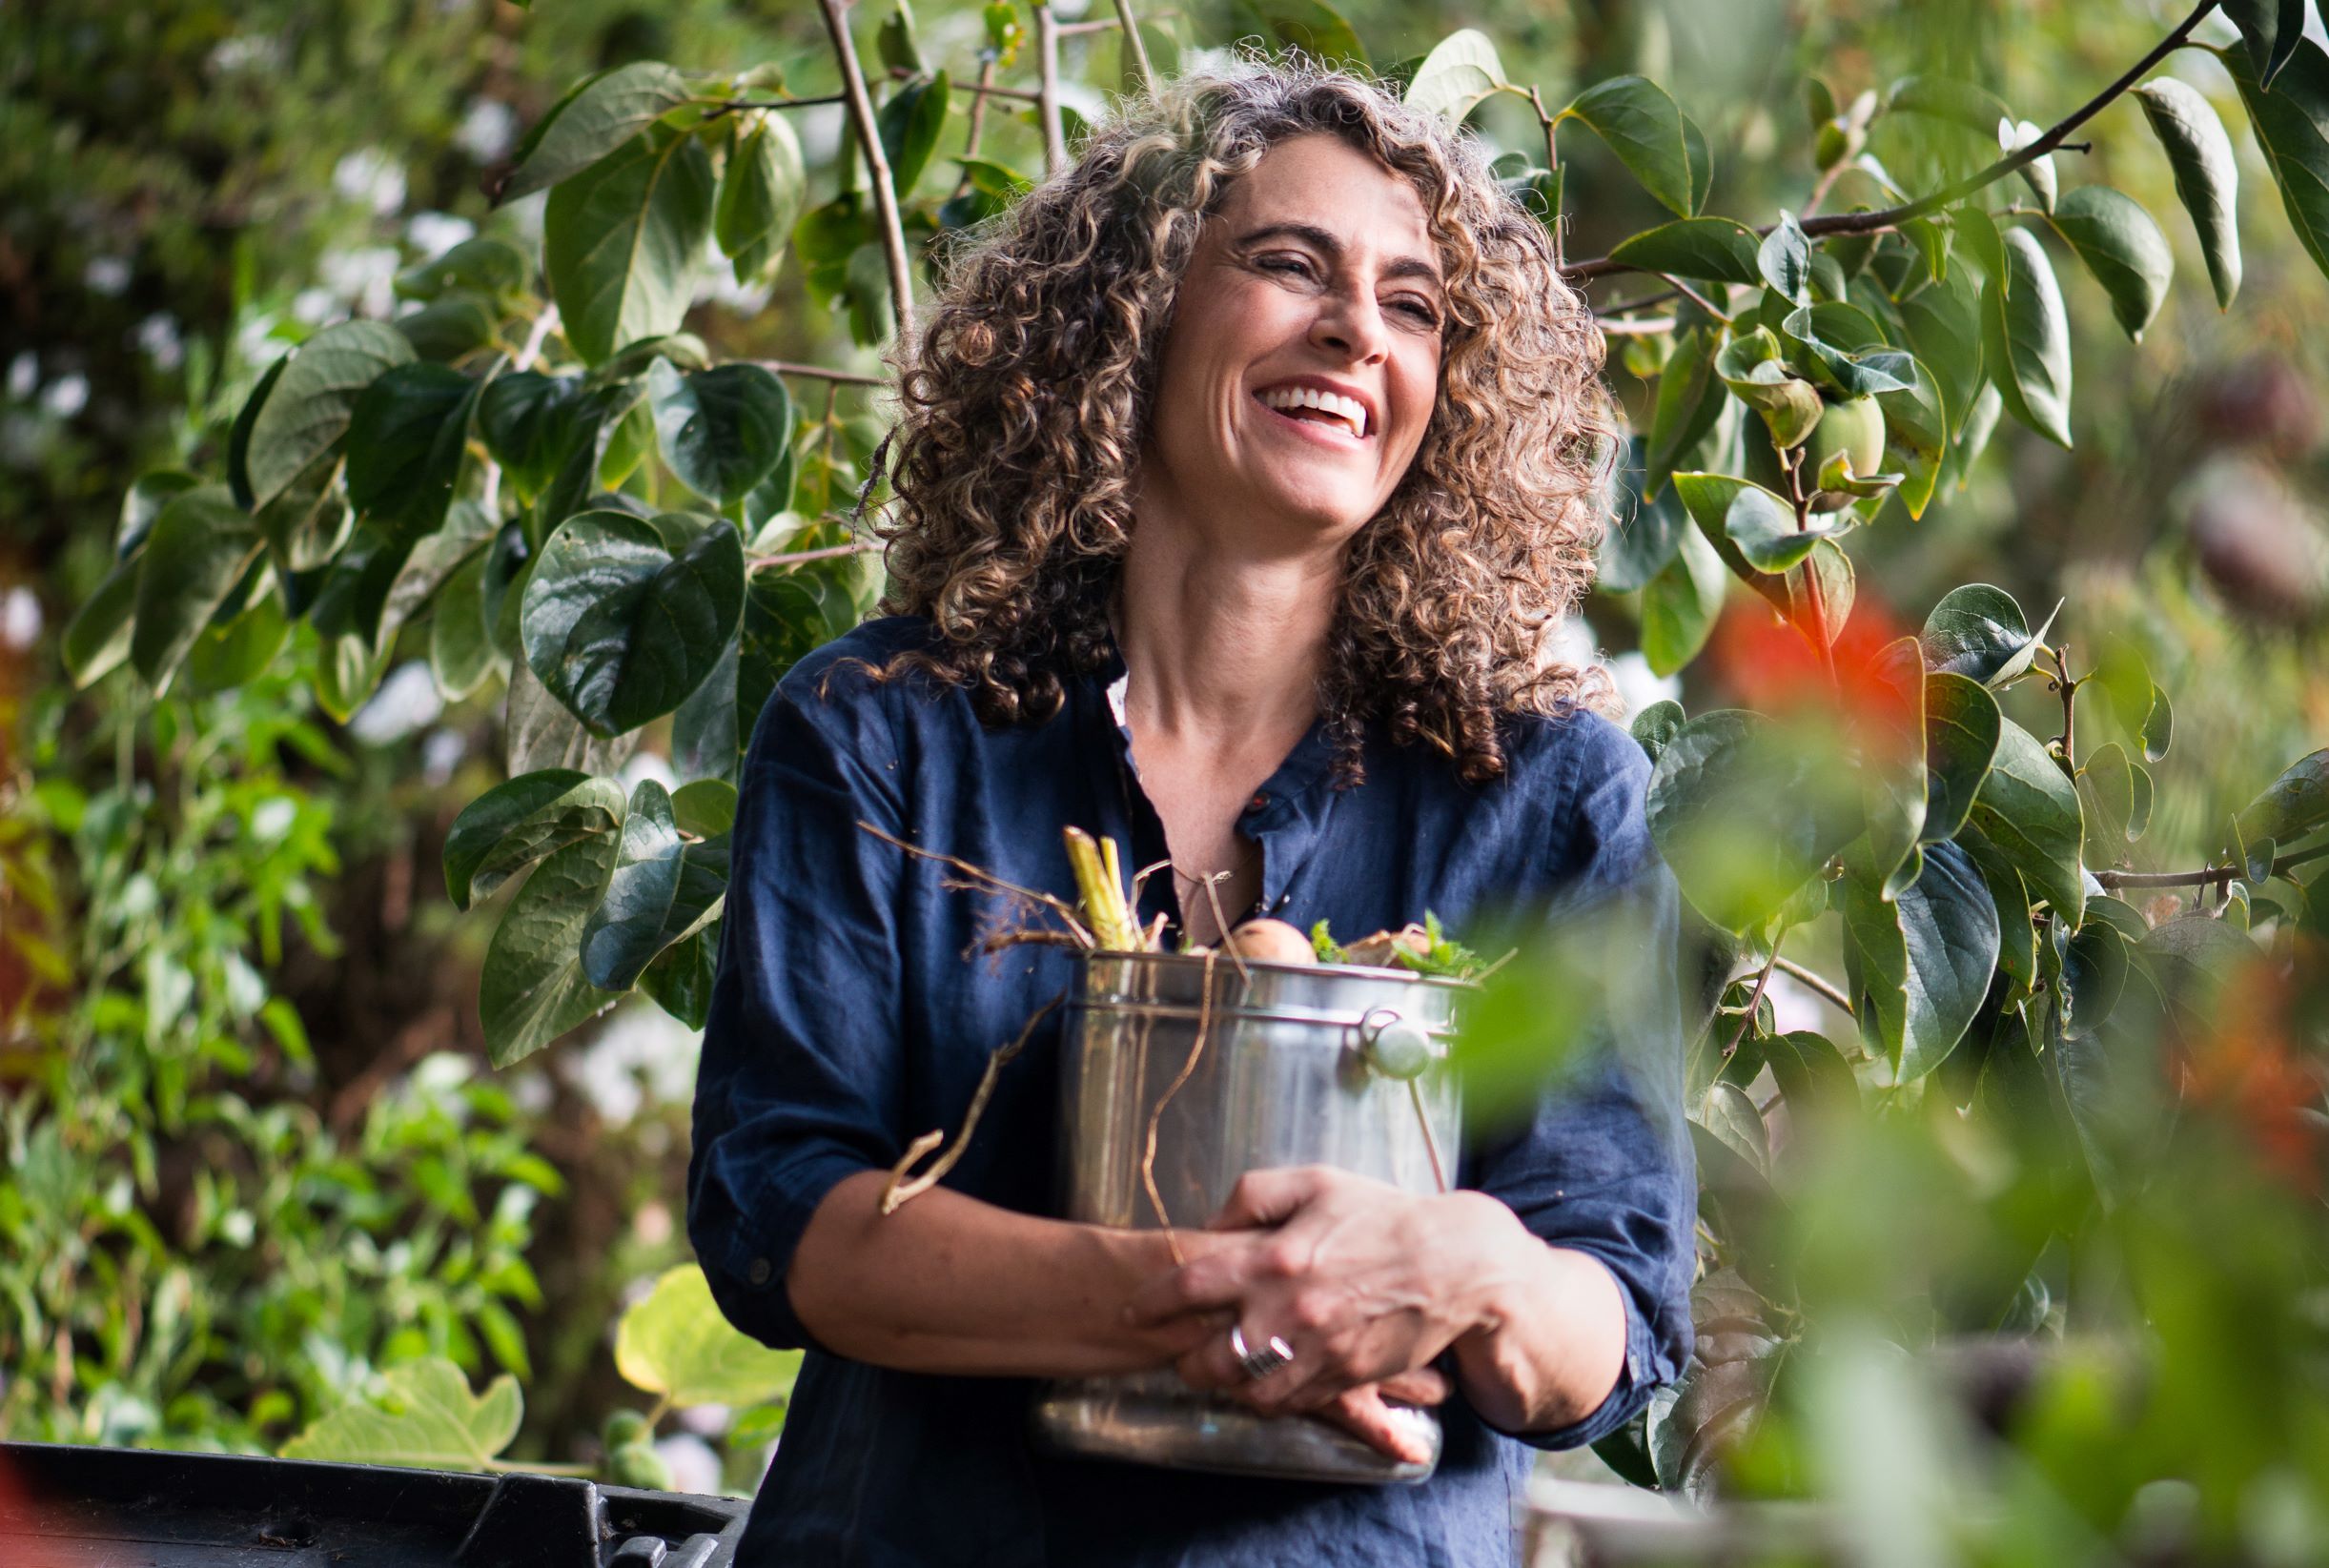 Laughing woman with shoulder length curly gray-brown hair wearing a dark blue shirt, holding a silver bucket of vegetables, and surrounded by green leaves